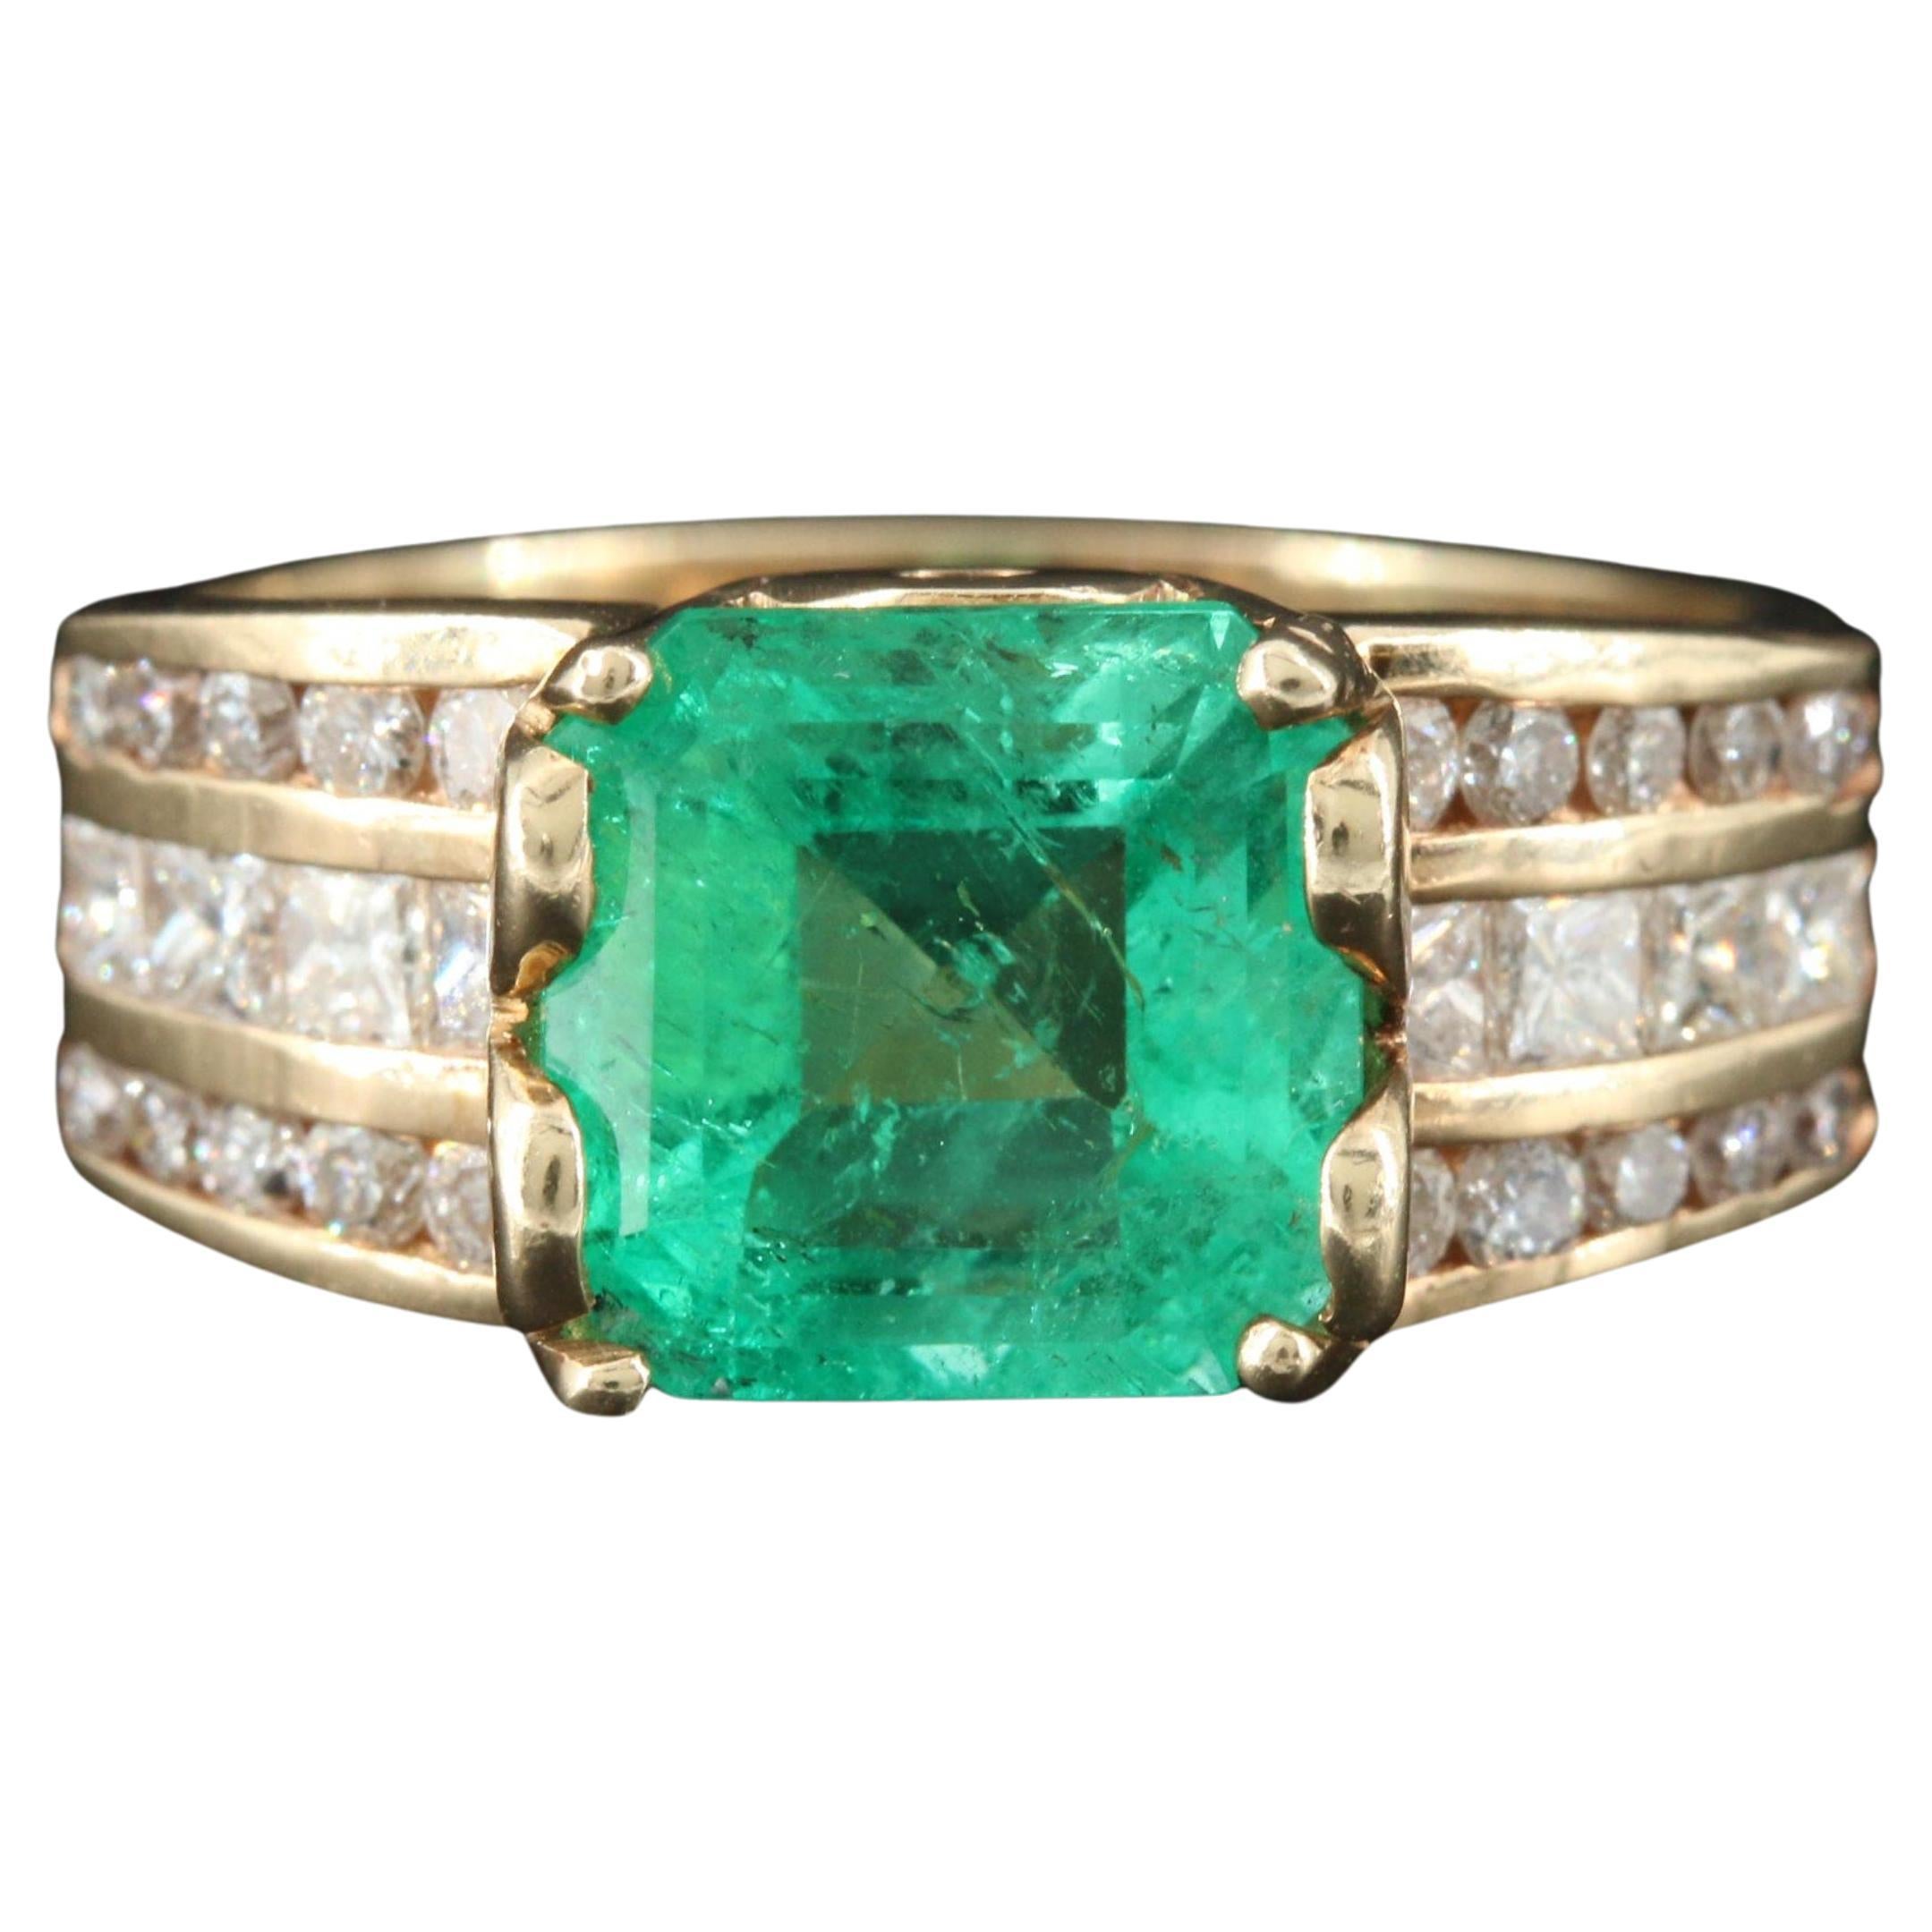 For Sale:  Art Deco 3 Carat Natural Emerald Diamond Engagement Ring, 18K Gold Band Ring